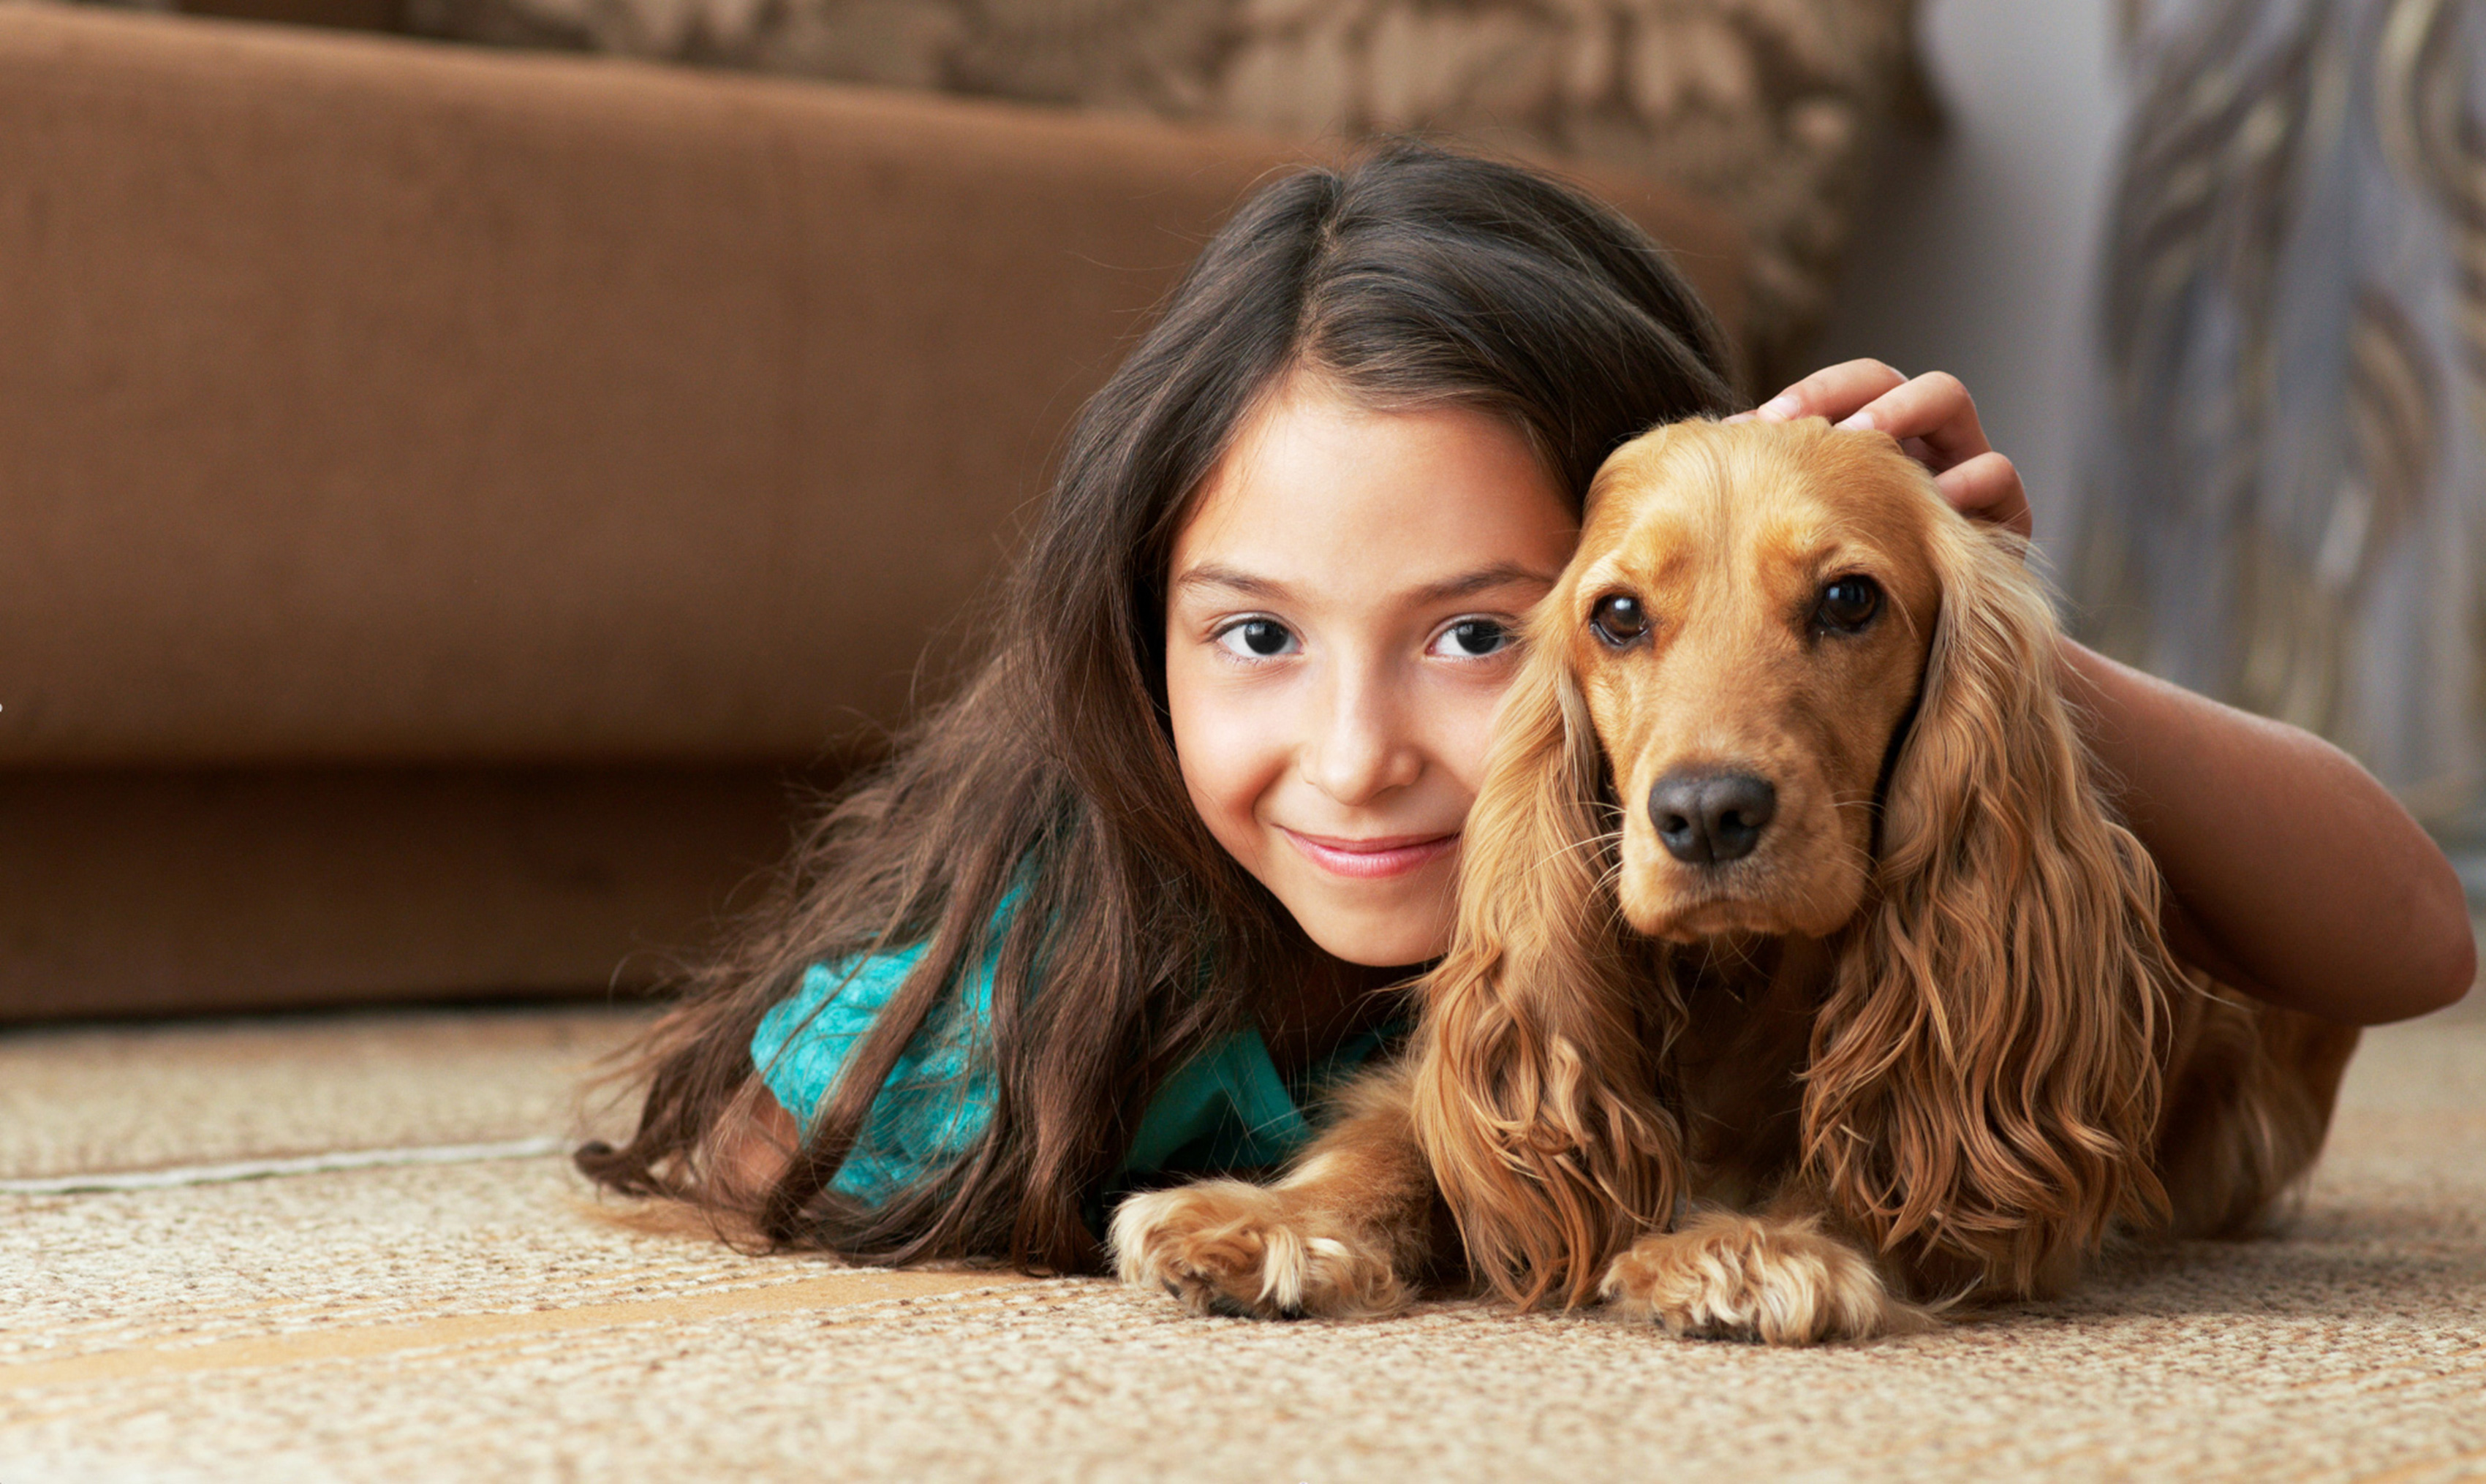 Can Pets Help Children Feel Less Anxious? - Georgetown Psychology